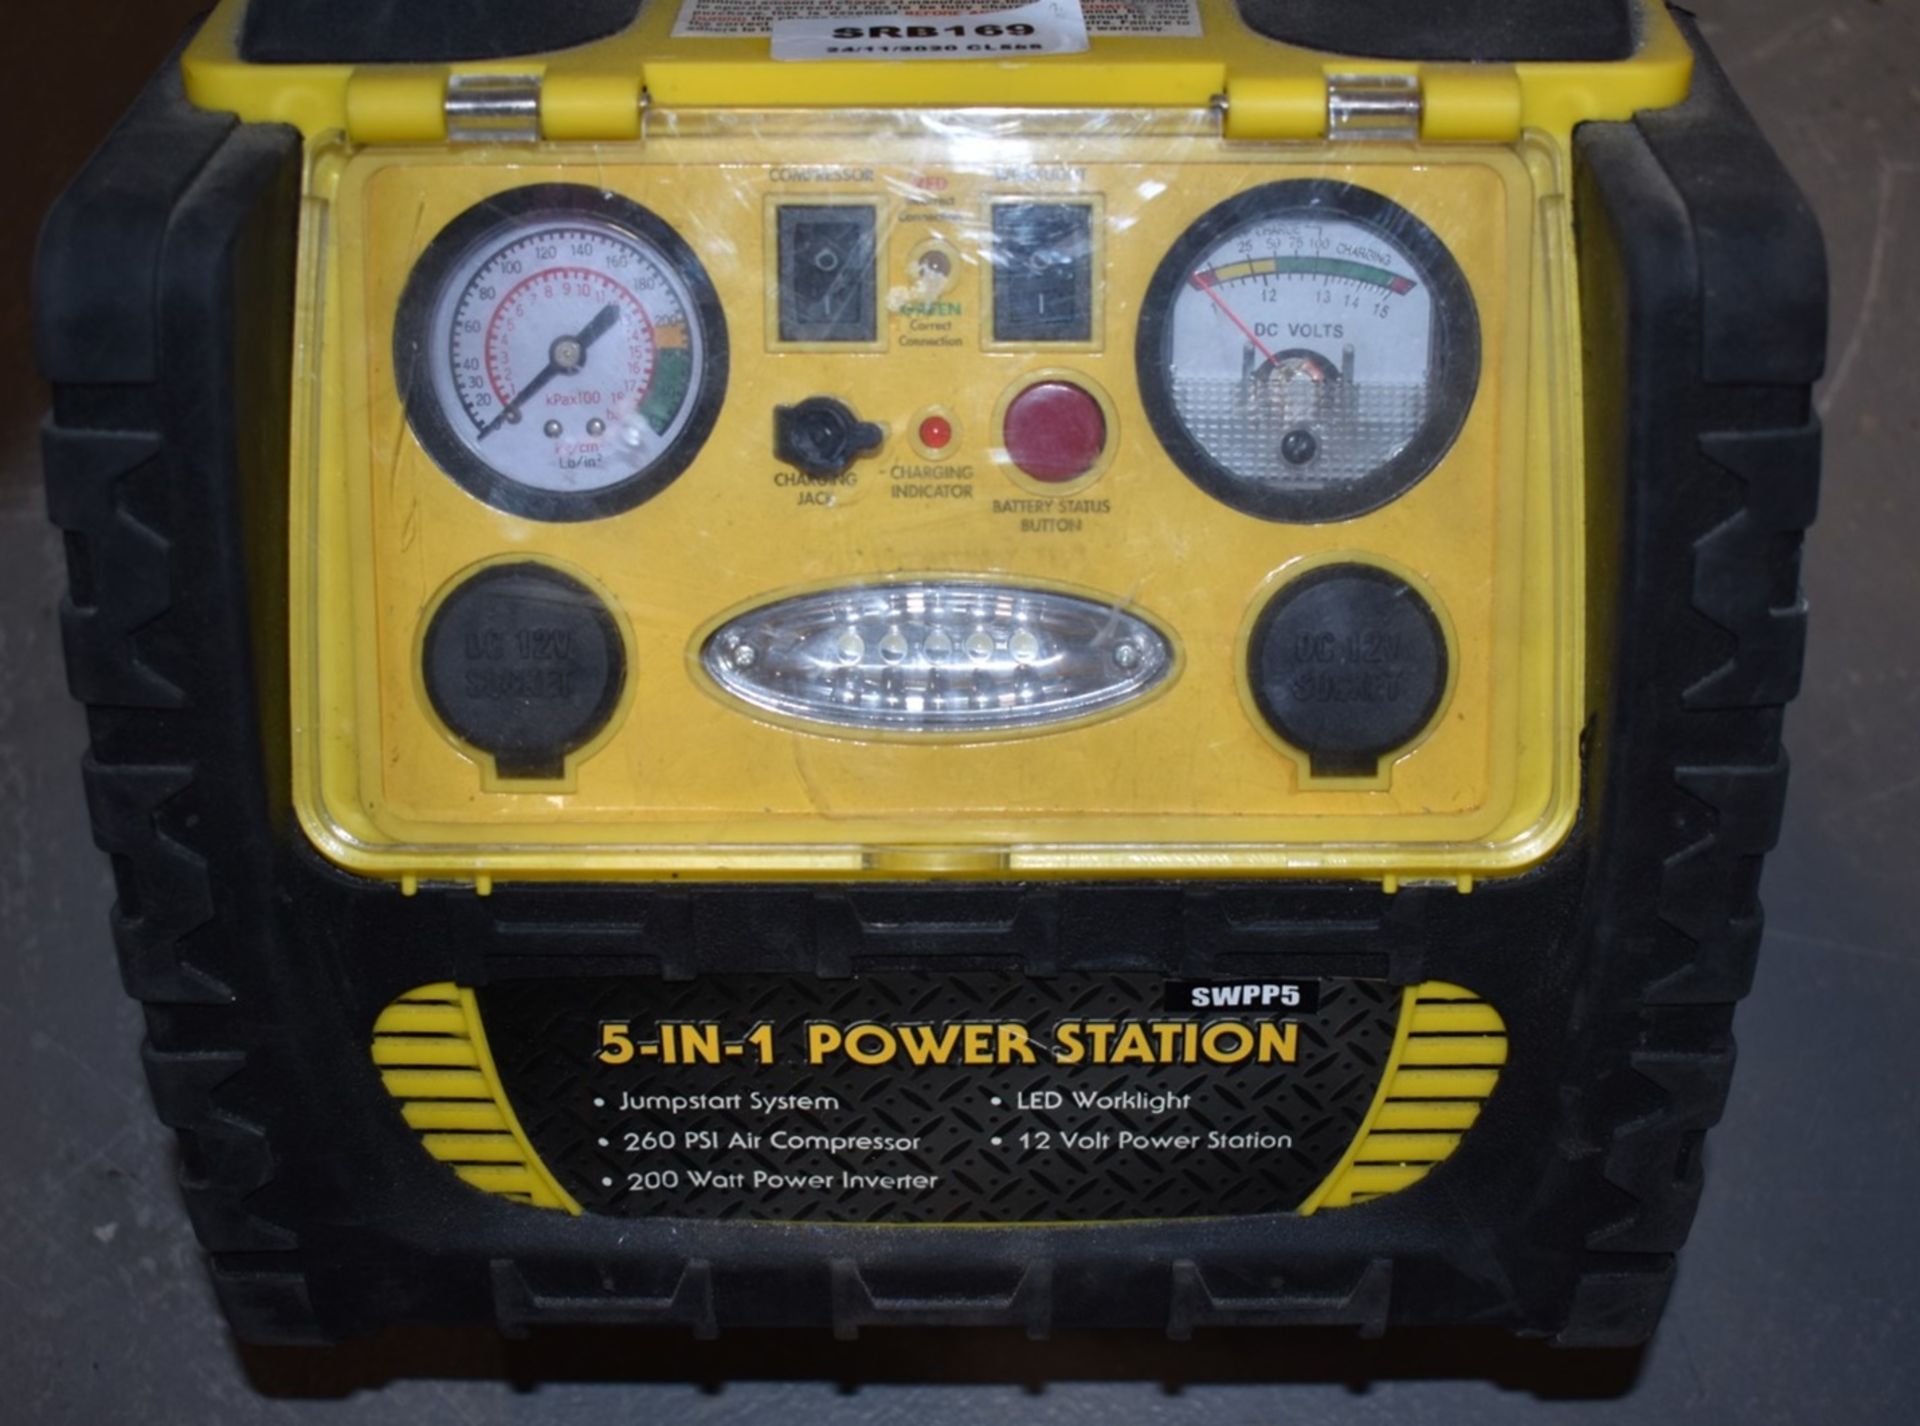 1 x Streetwize 5 in 1 Power Pack Features Jumpstart System, Power Inverter Air Compressor, LED